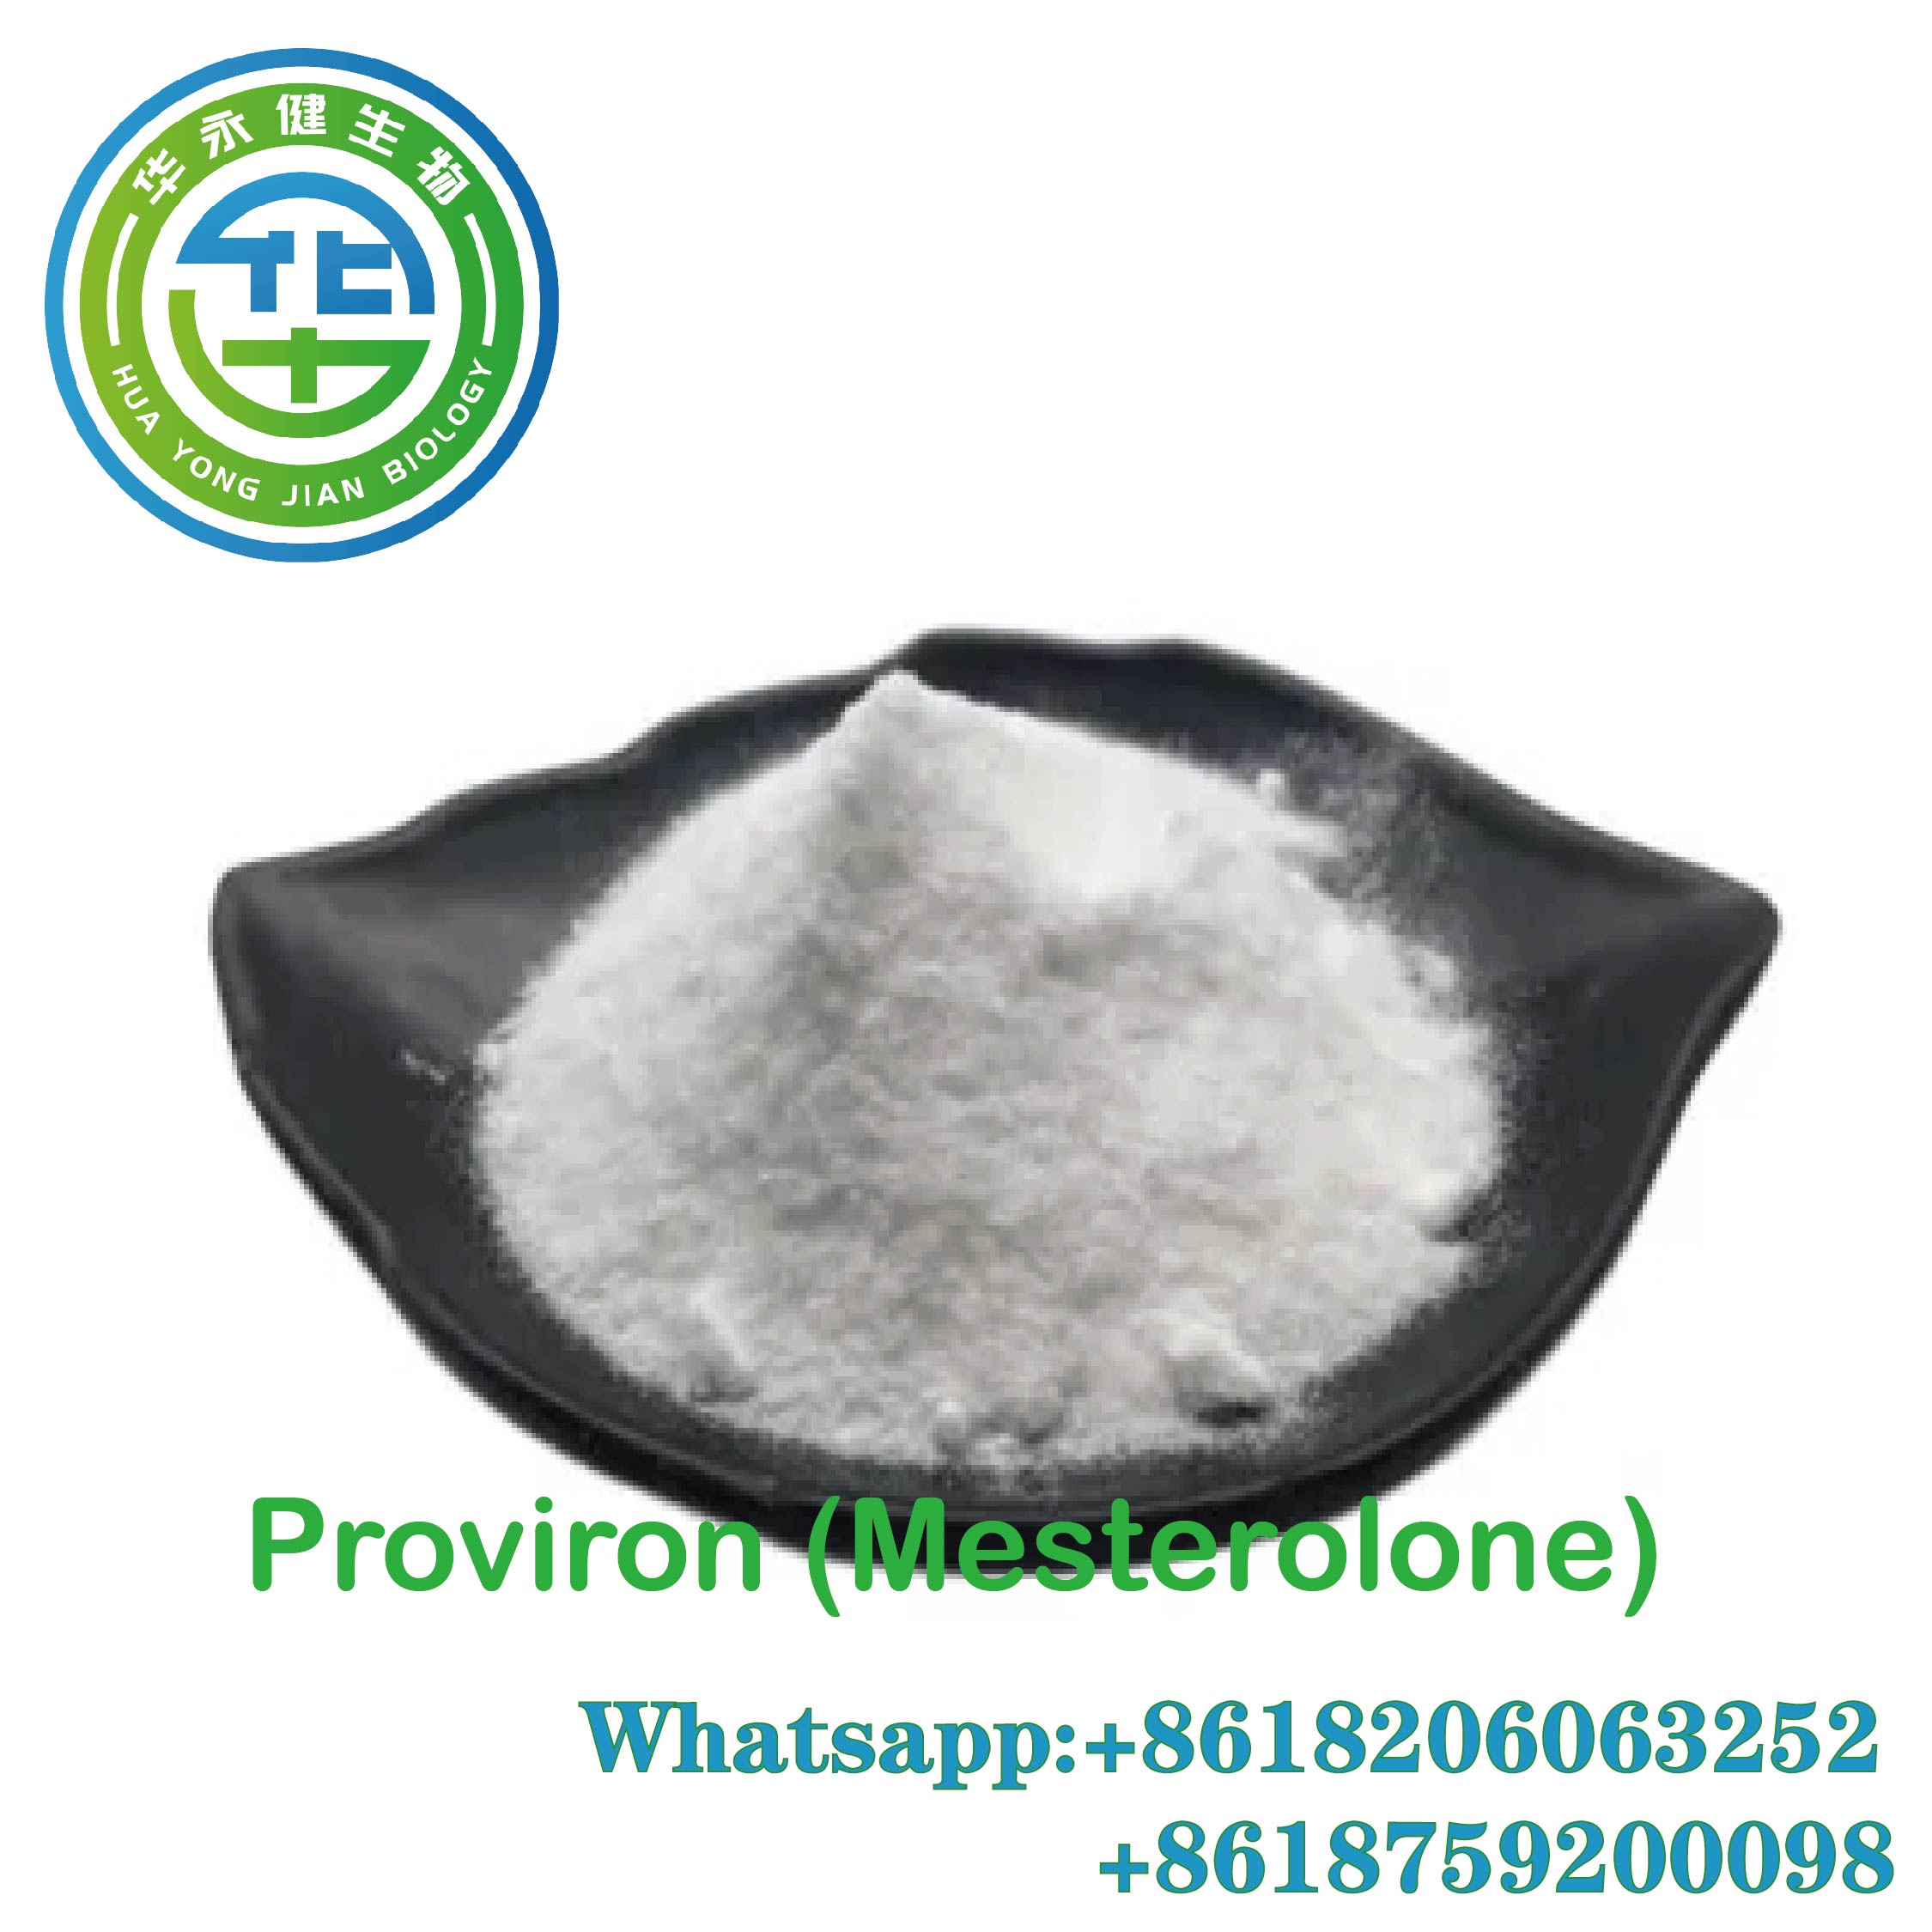 Male Enhancement Proviron Powder Oral Anabolic Steroids Muscle Growth Steroids Mesterolone CAS 1424-00-6